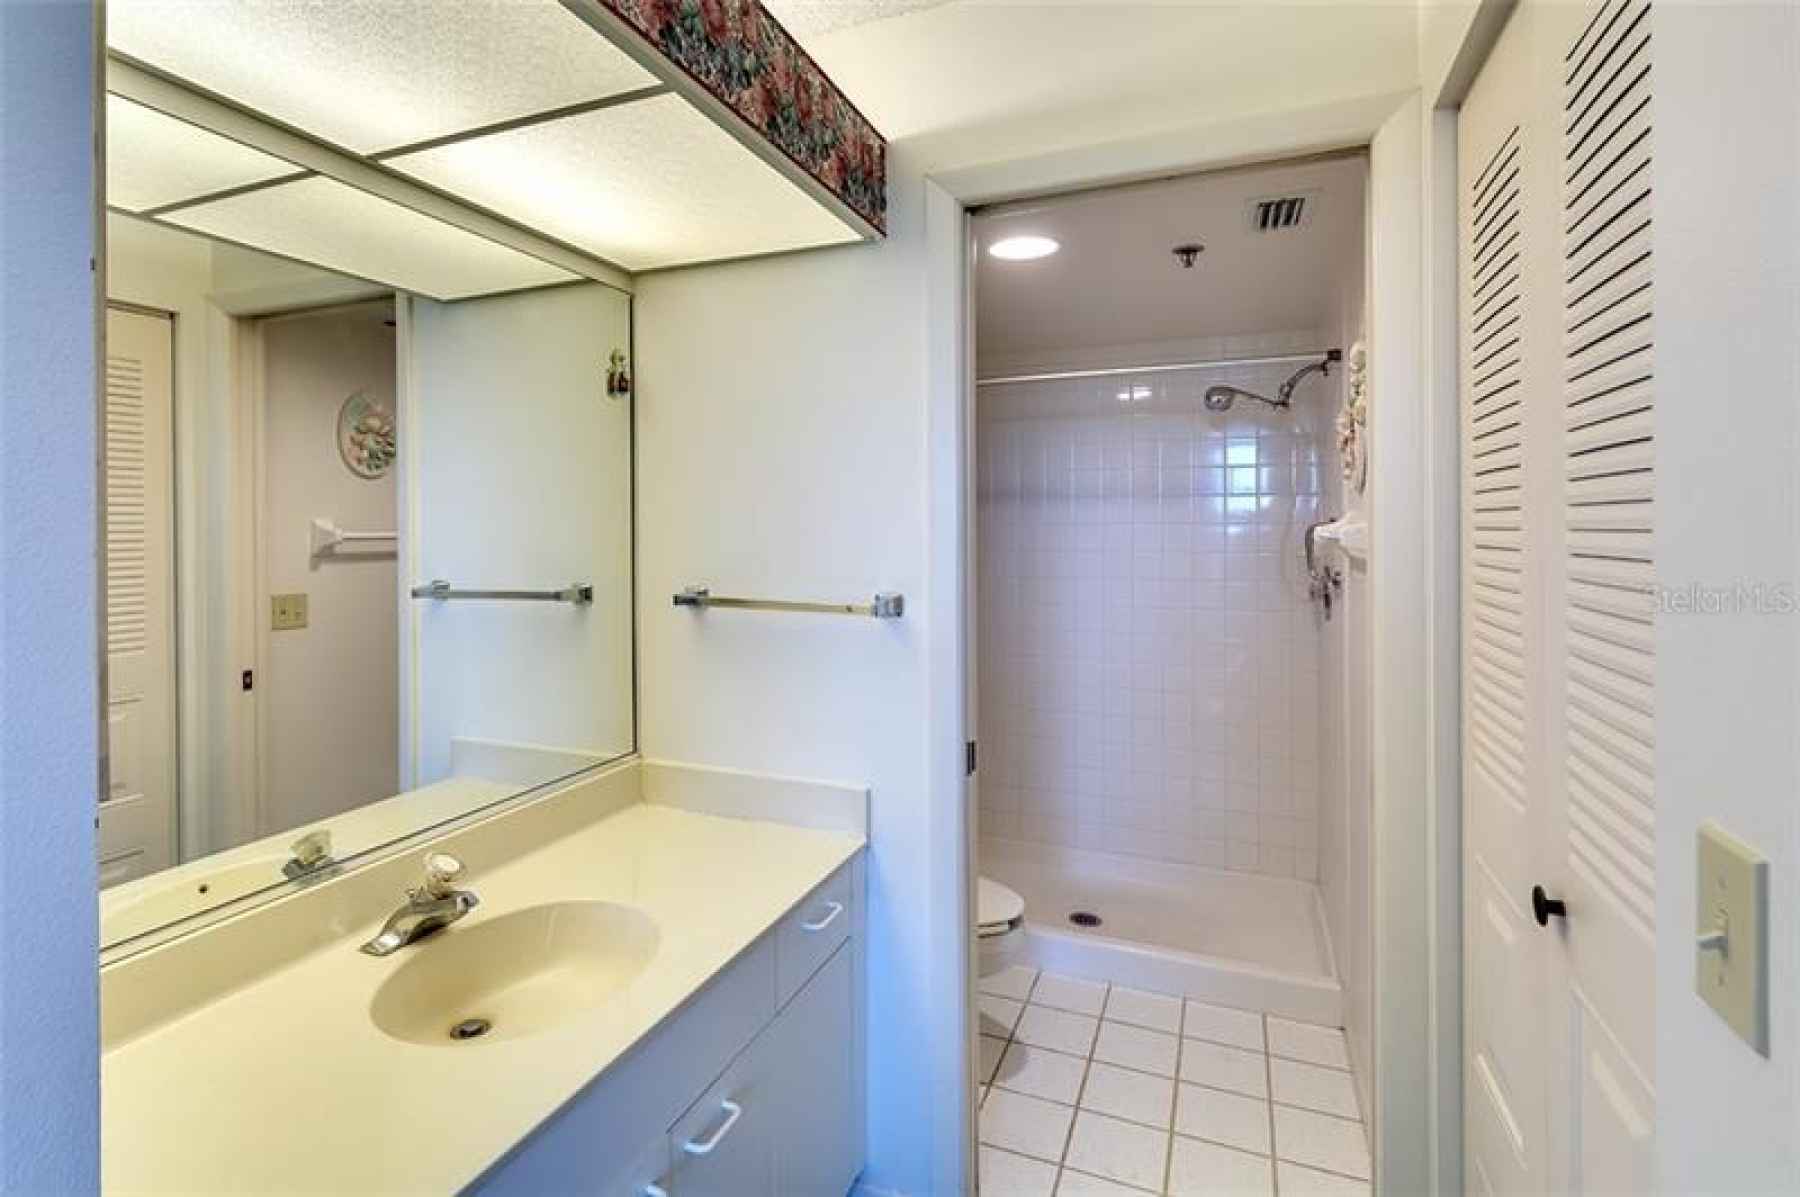 Master bathroom has a shower with small lip for ease of use.